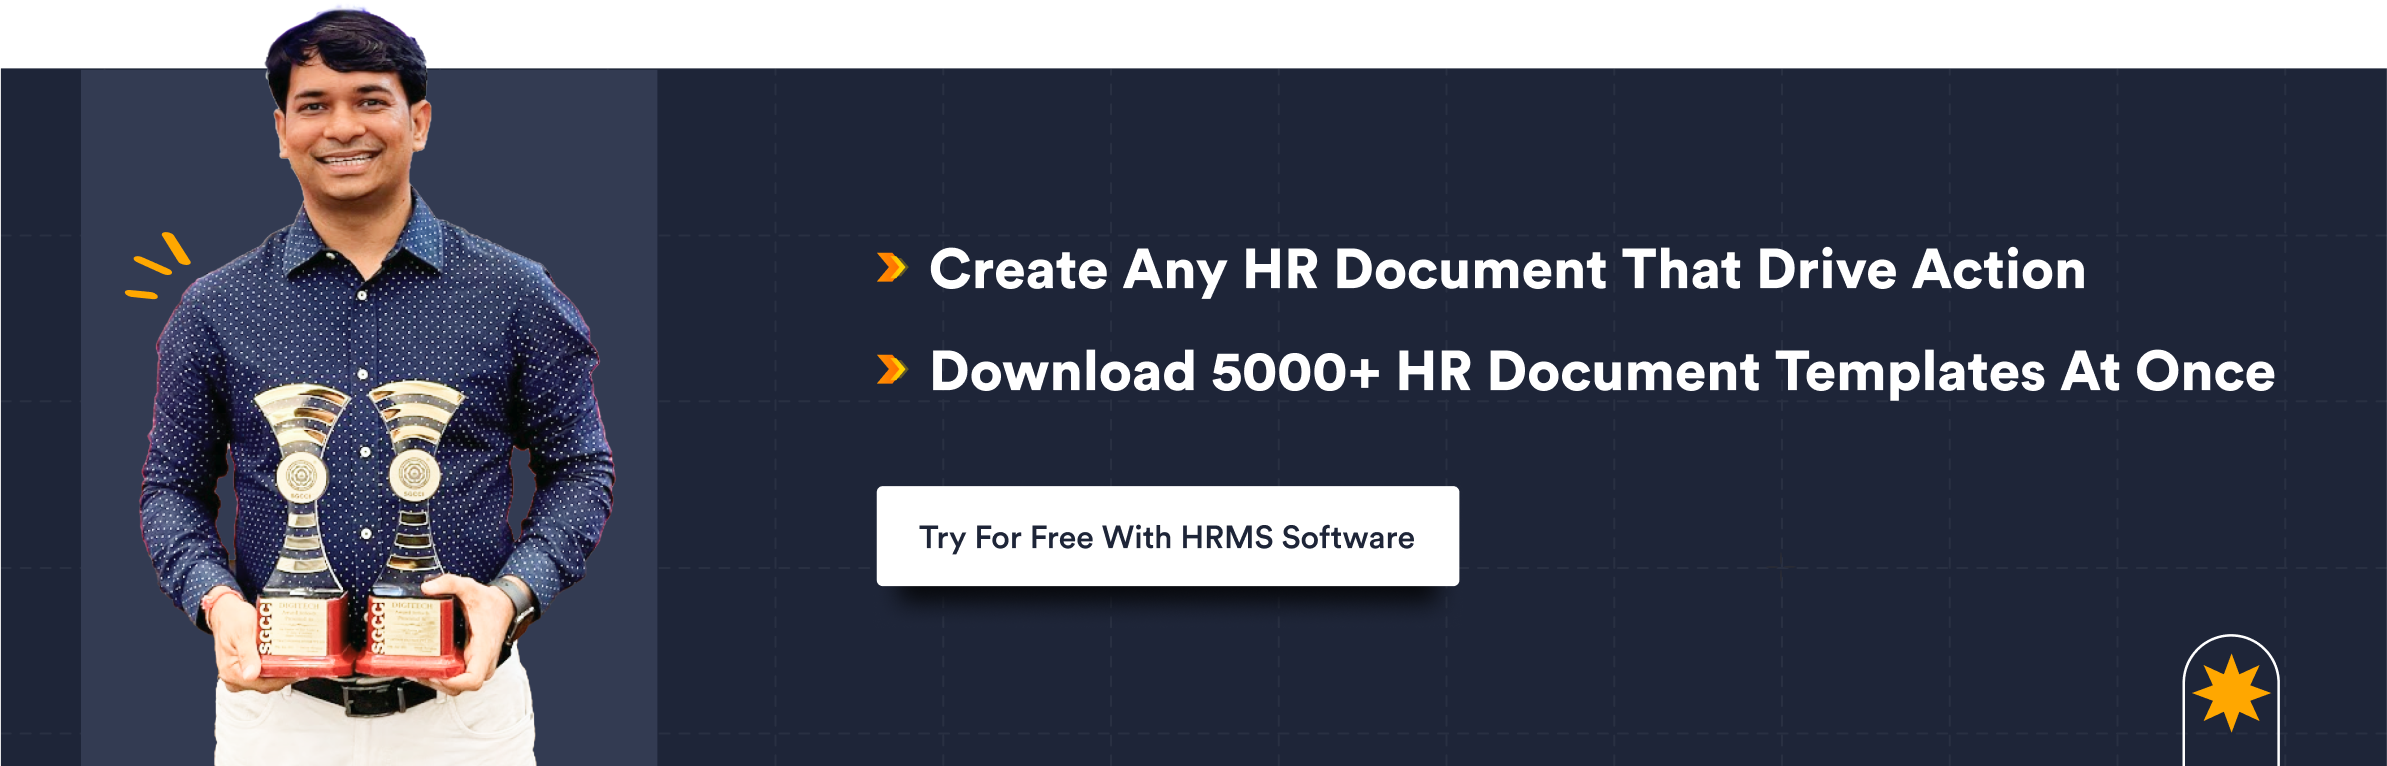 Create Any HR Document That Drive Action 1 1